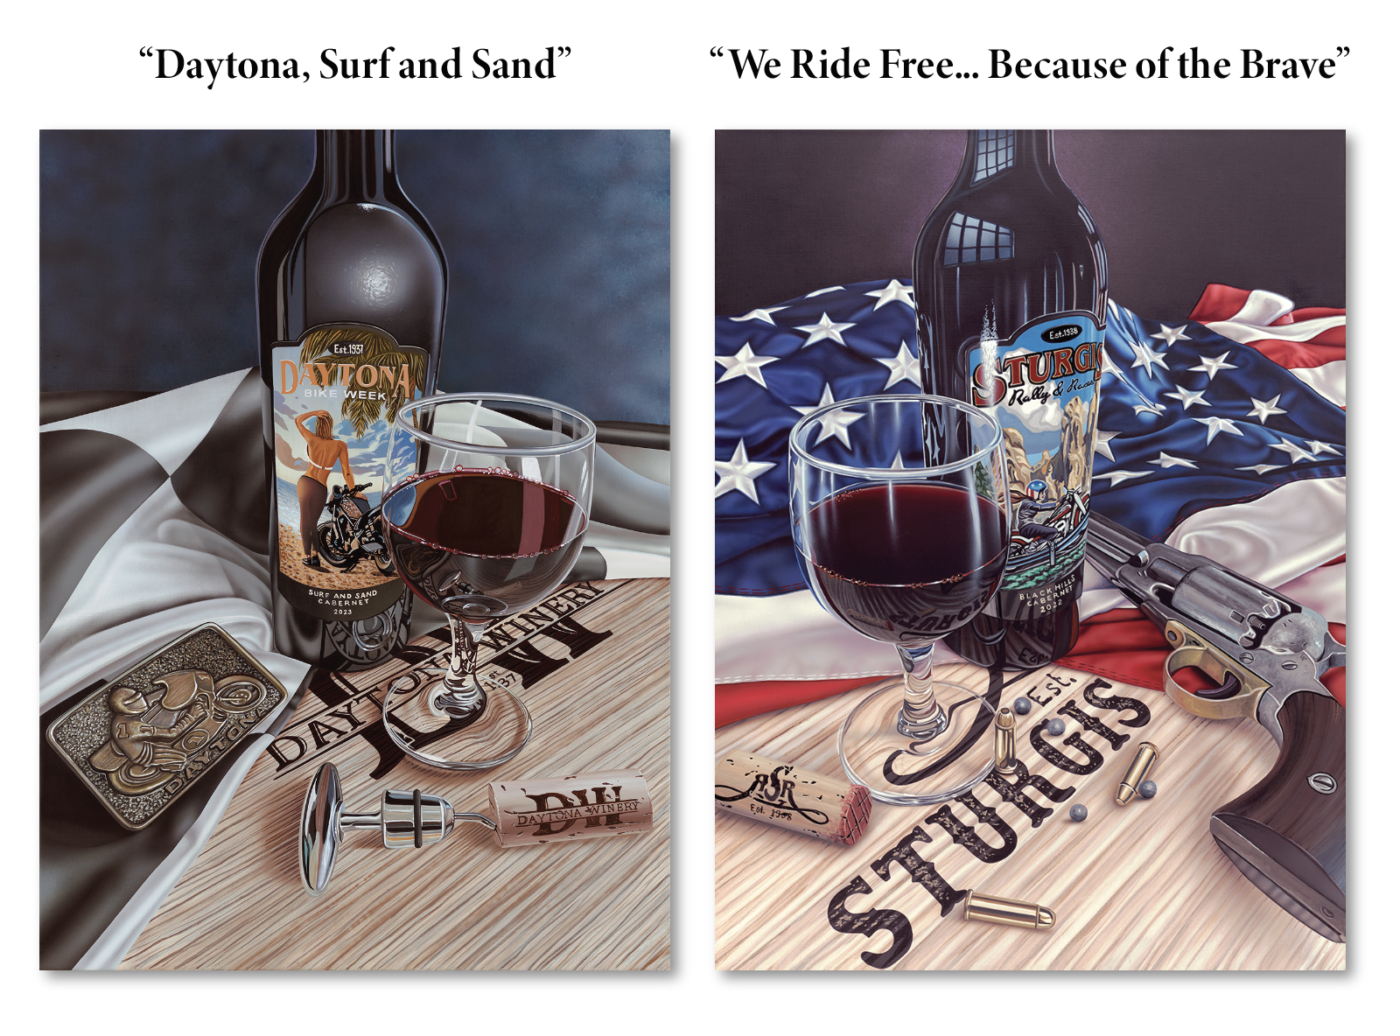 scott jacobs' 82nd motorcycle rally paintings for sturgis and daytona